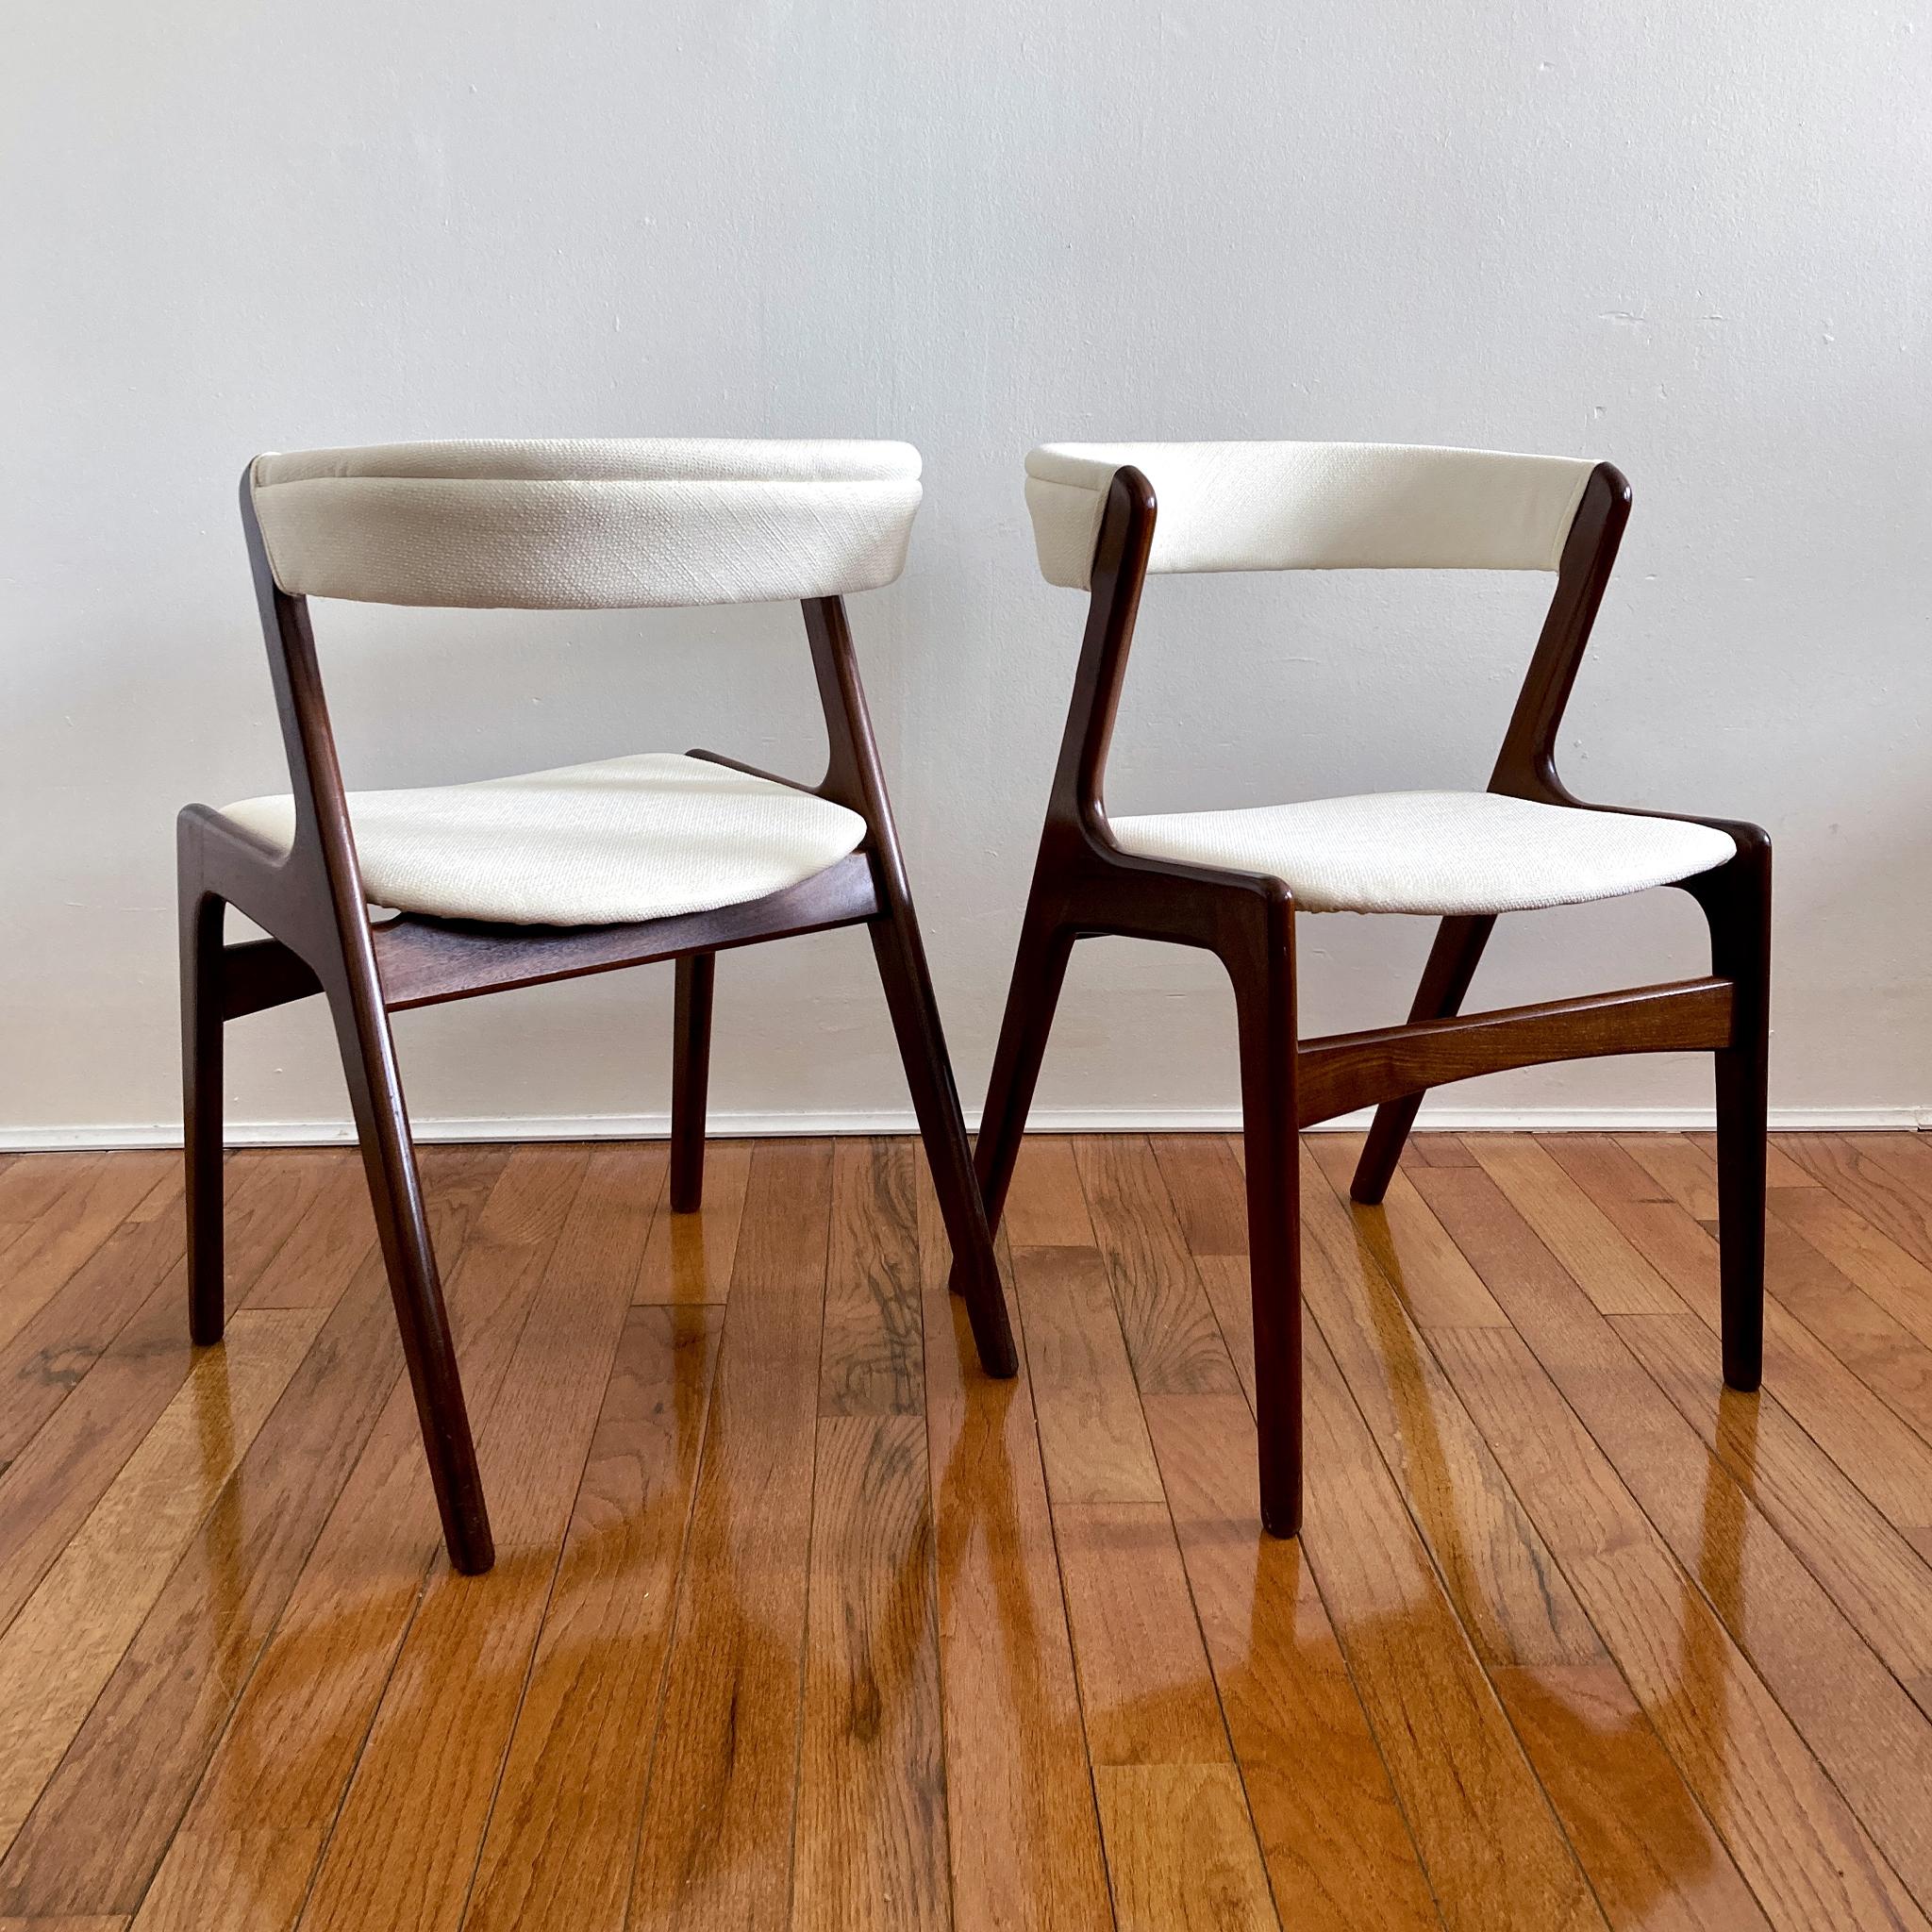 Set of two beautiful midcentury chairs, Kai Kristiansen’s iconic curved back chair Silhouette. Teak frame, seat and curved back reupholstered with ivory tweed. Structurally sound, in good vintage condition with very minor scuffs.